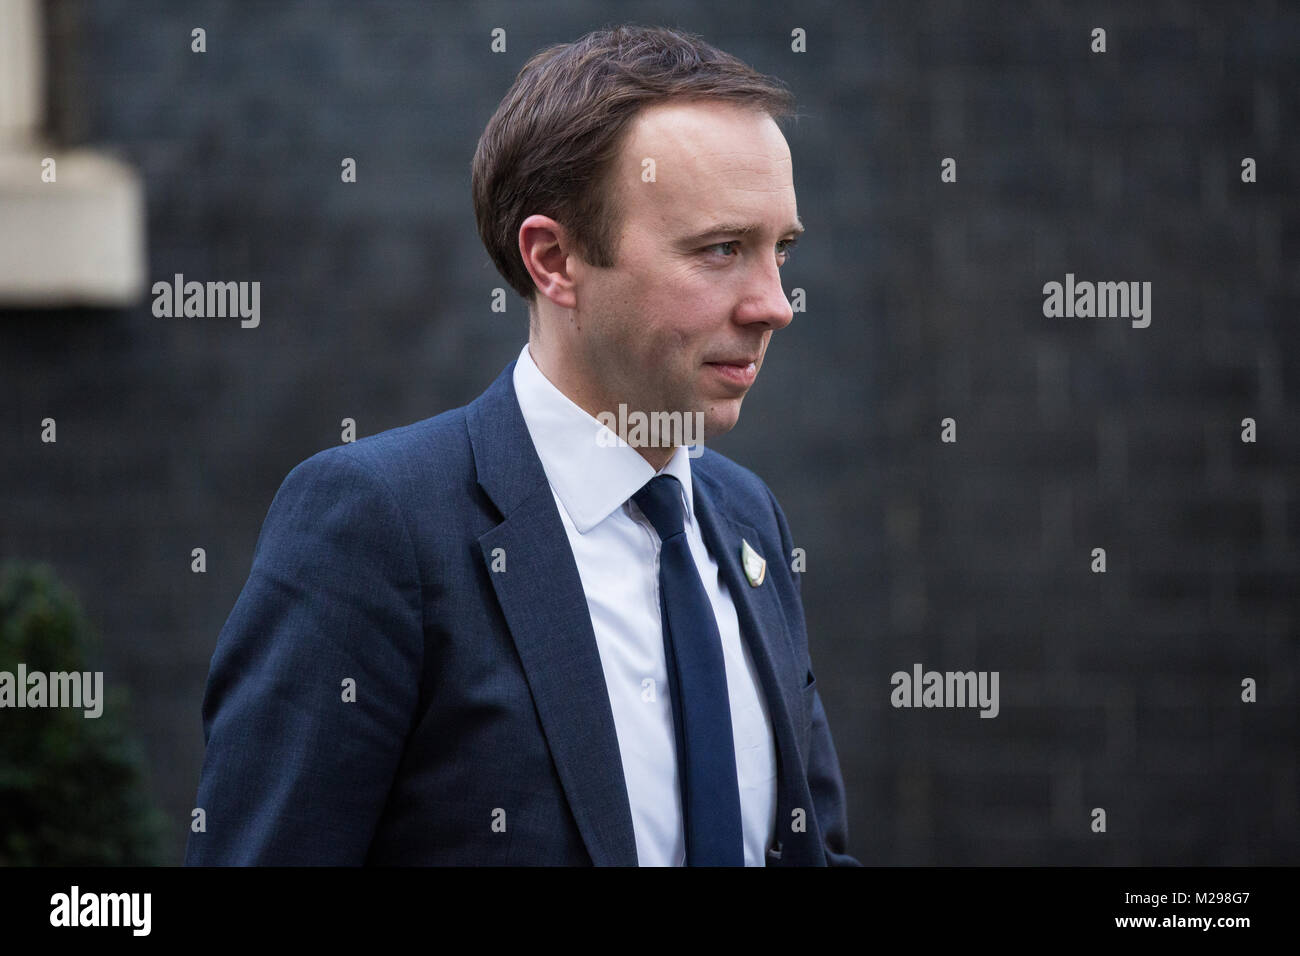 London, UK. 6th February, 2018. Matt Hancock MP, Secretary of State for Digital, Culture, Media and Sport, leaves 10 Downing Street following a Cabinet meeting. Credit: Mark Kerrison/Alamy Live News Stock Photo